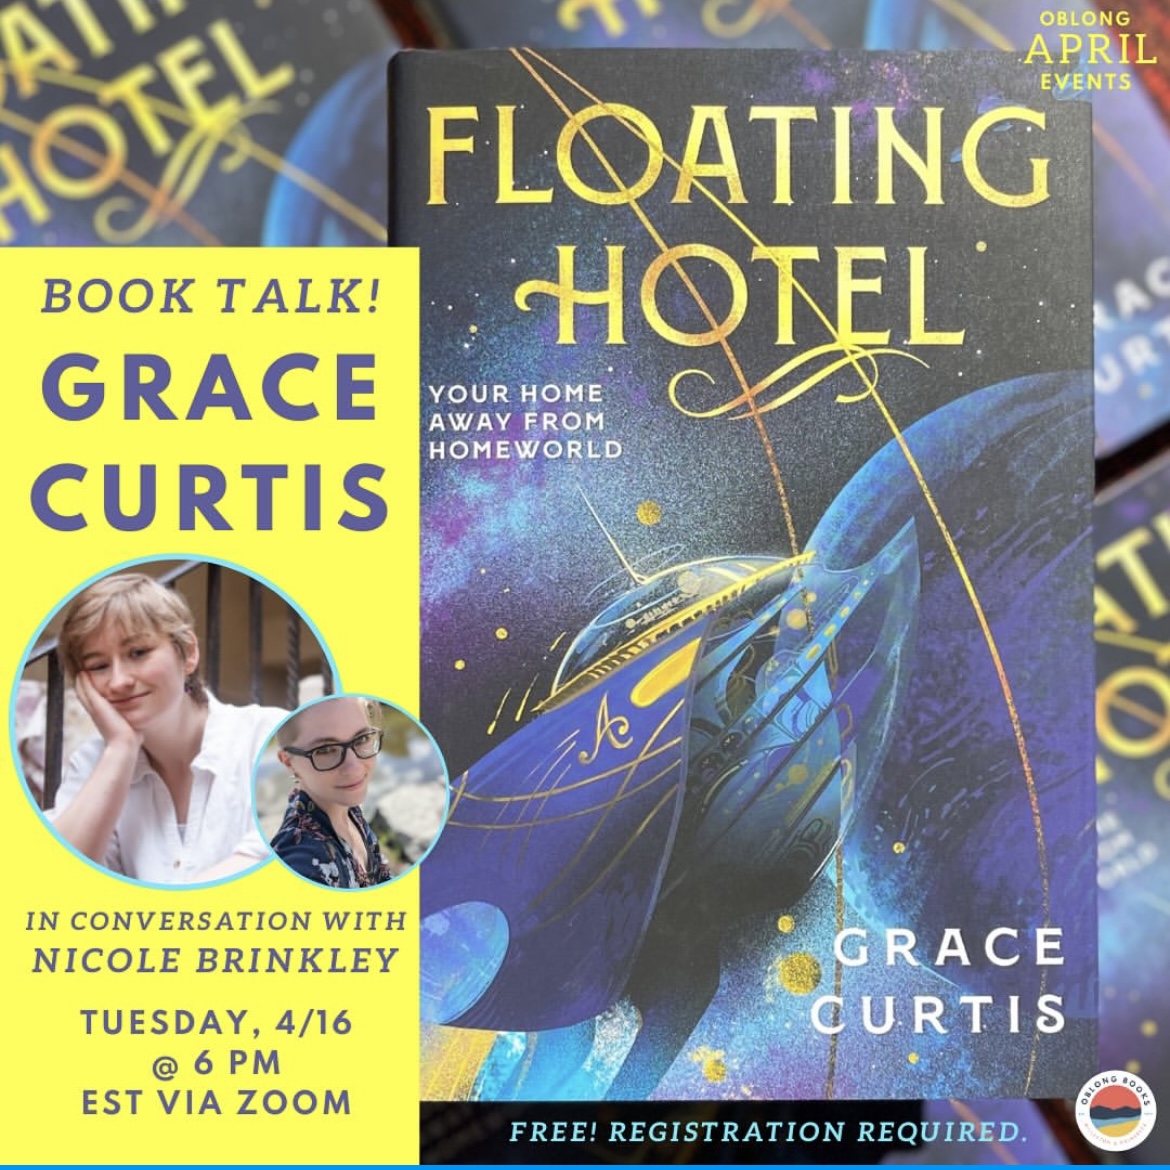 Grace Curtis joins Oblong Books' Nicole Brinkley TOMORROW (4/16 @ 6 PM ET) virtually to discuss their latest cozy science fiction novel, FLOATING HOTEL. Register: us06web.zoom.us/webinar/regist…